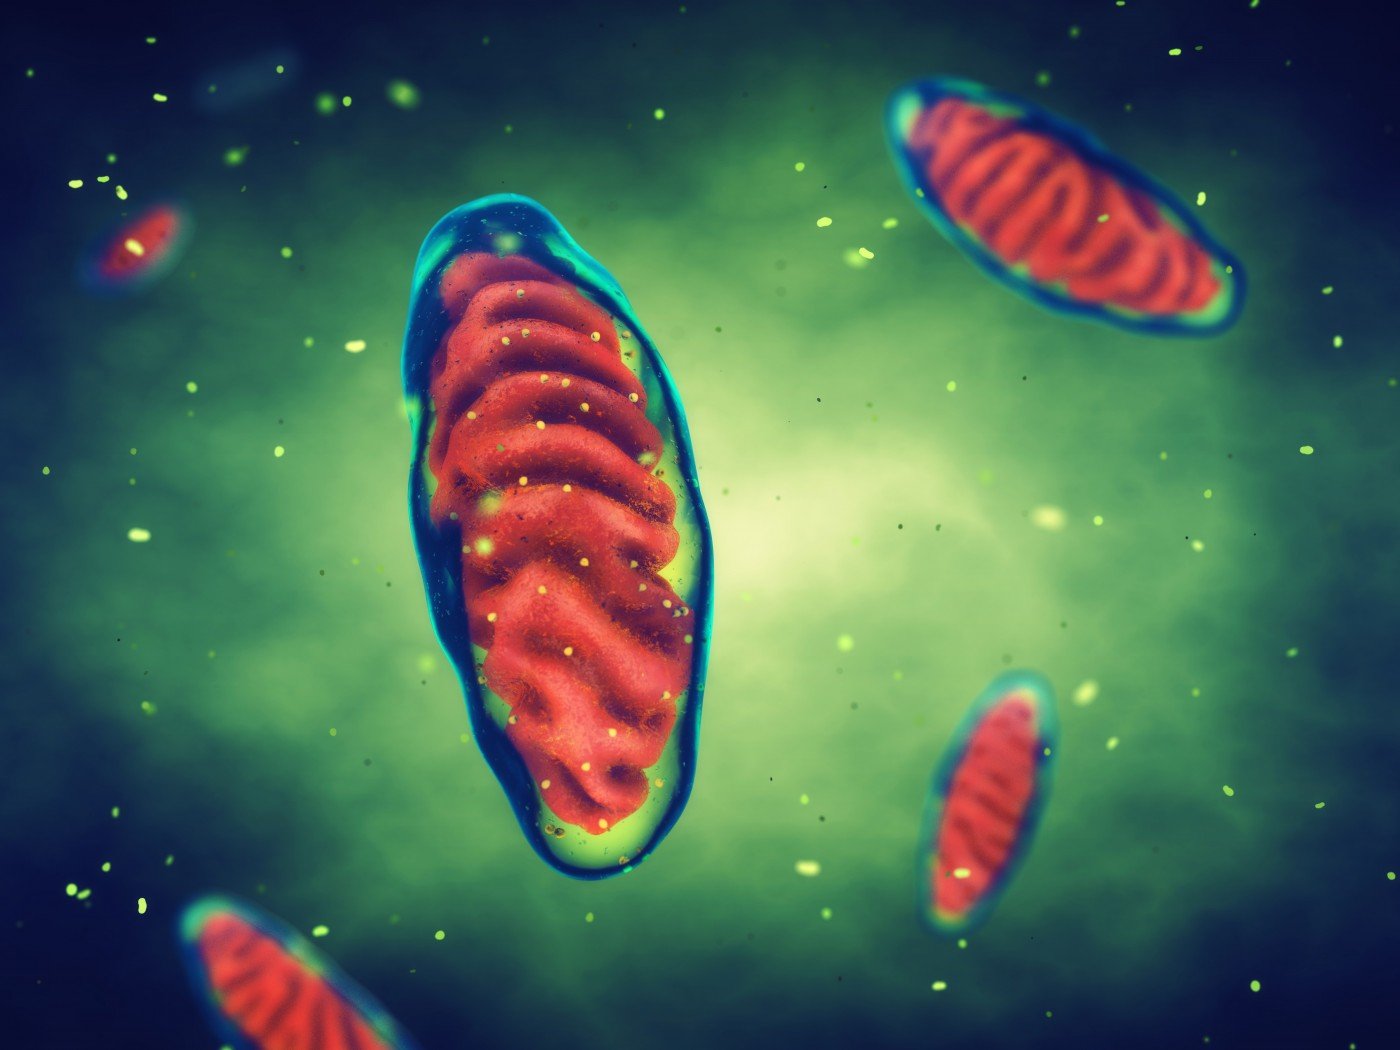 Case Links Mutation In Nuclear Gene With Mitochondrial Diseases